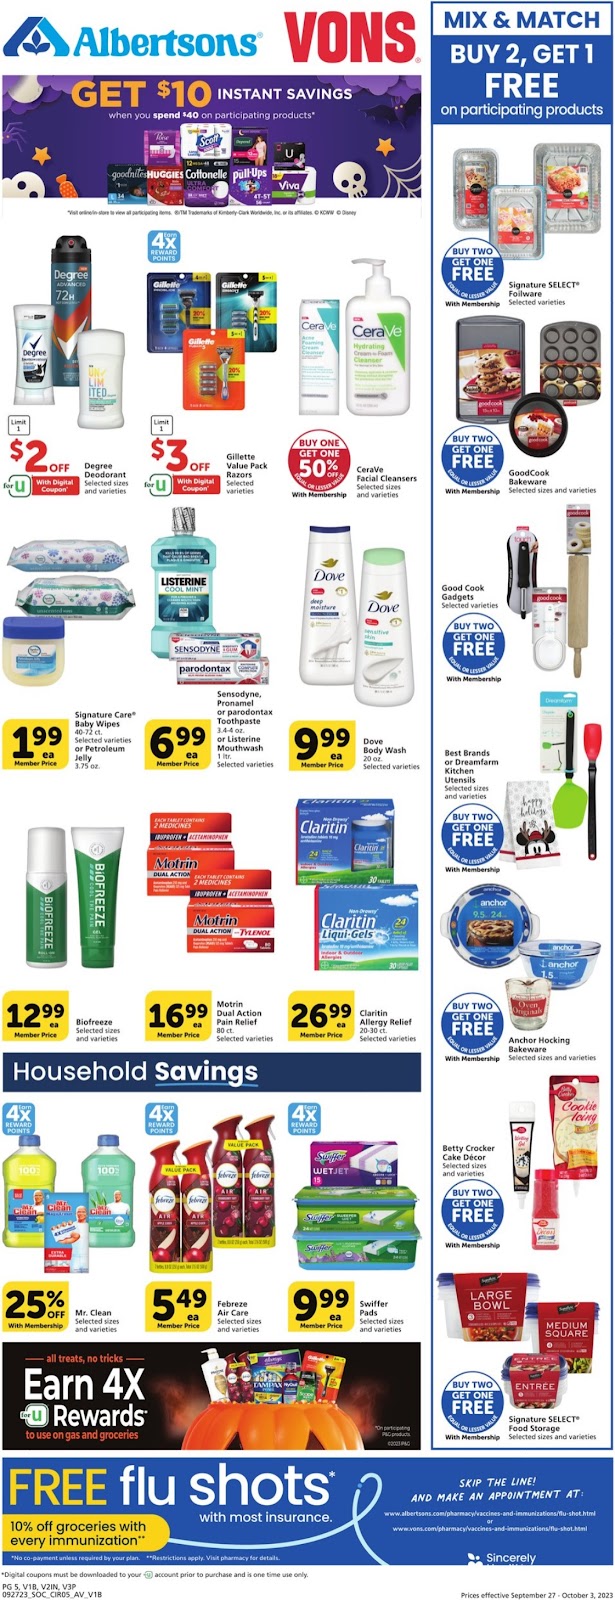 Vons Weekly Ad - 4